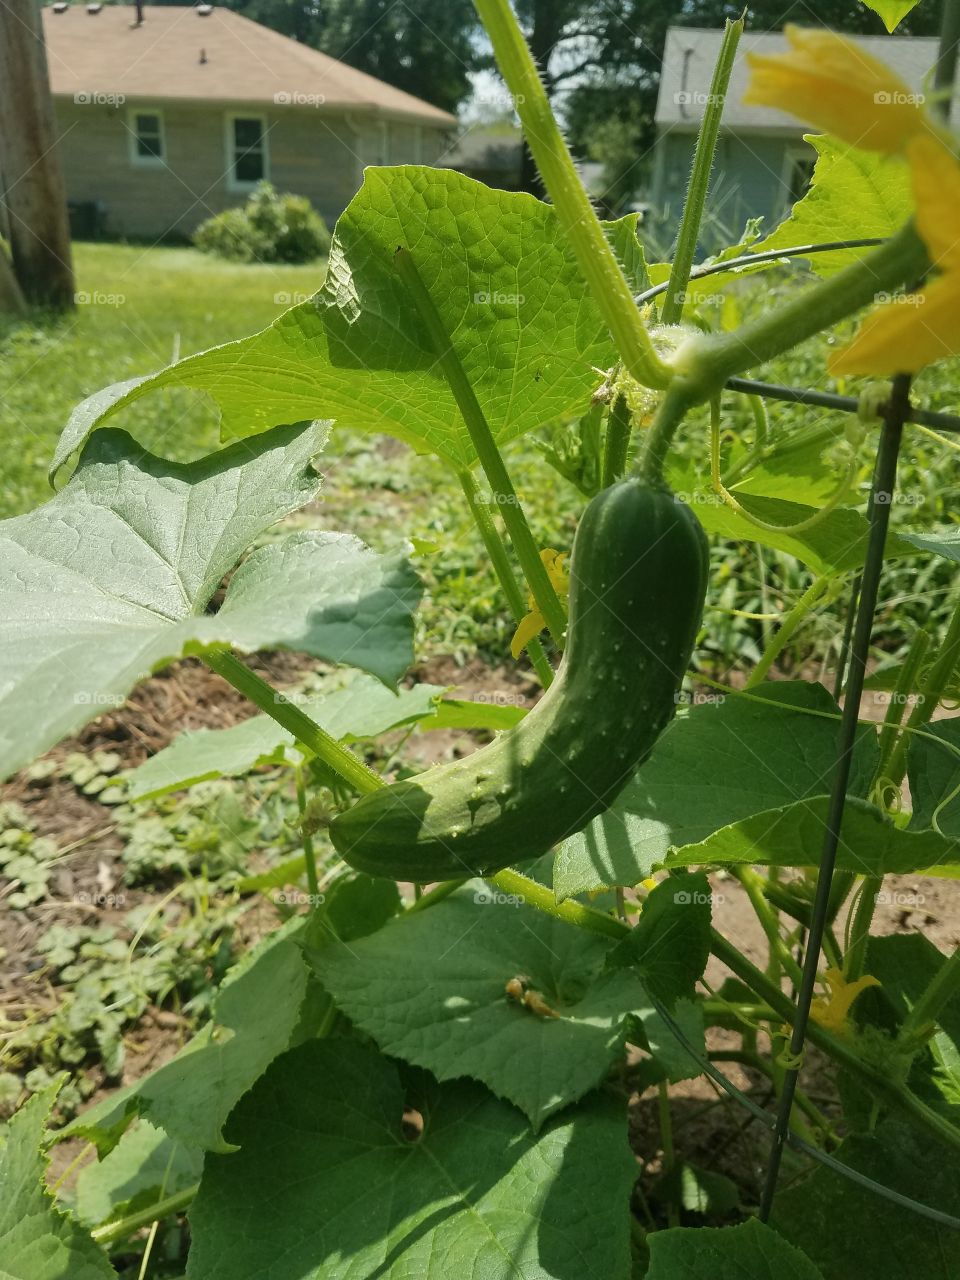 This is a fresh green growing cucumber on the vine.